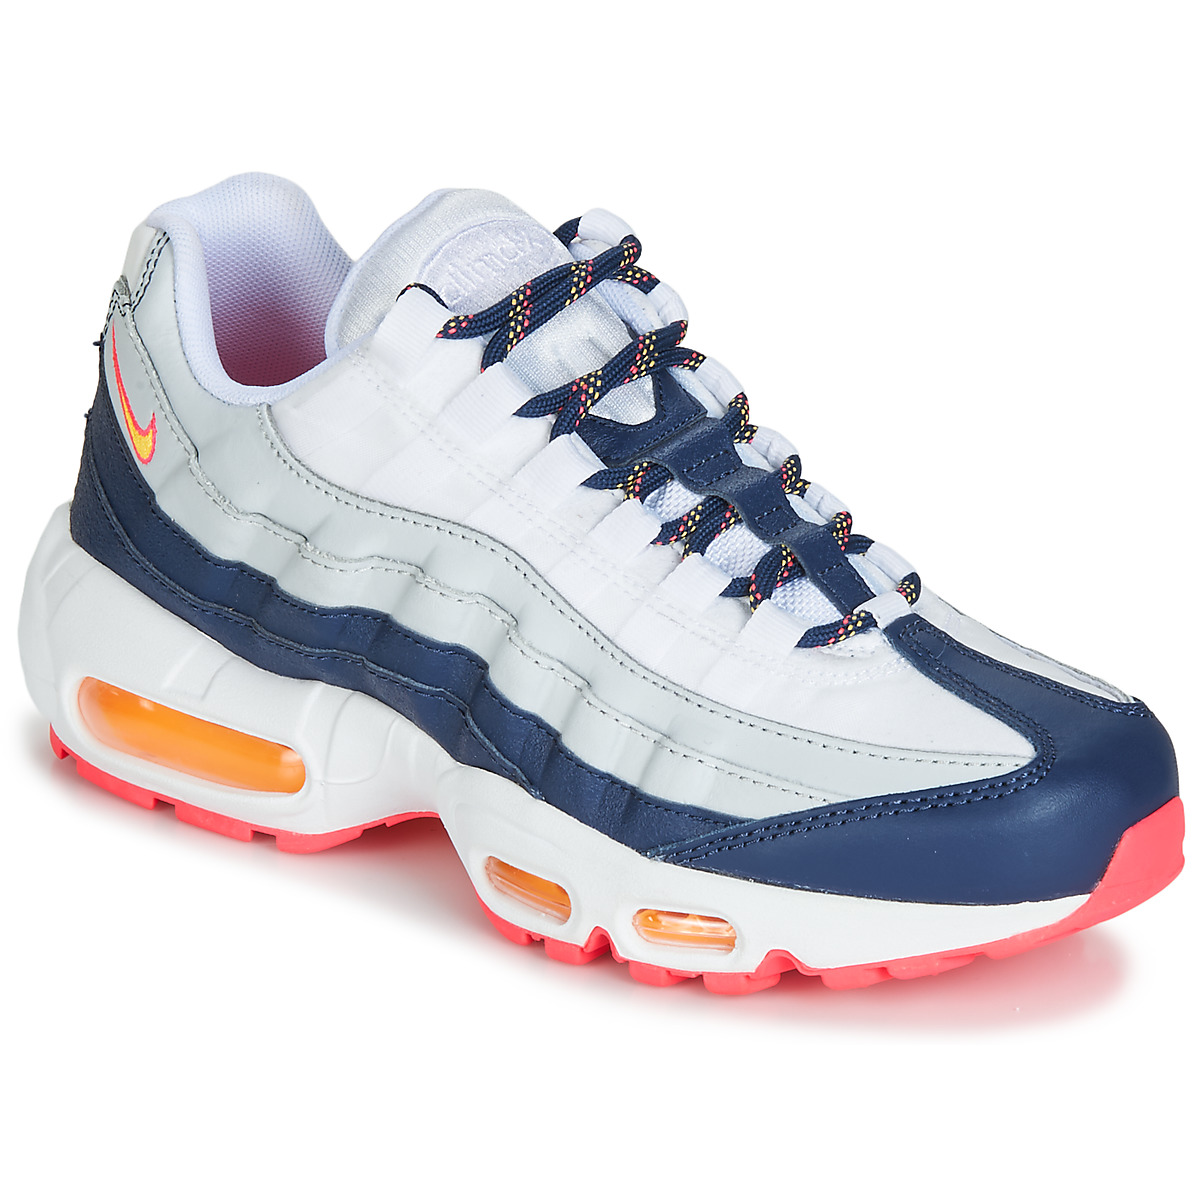 Nike AIR MAX 95 W White / Blue / Orange - delivery | Spartoo NET ! - Shoes Low top trainers Women USD/$180.00